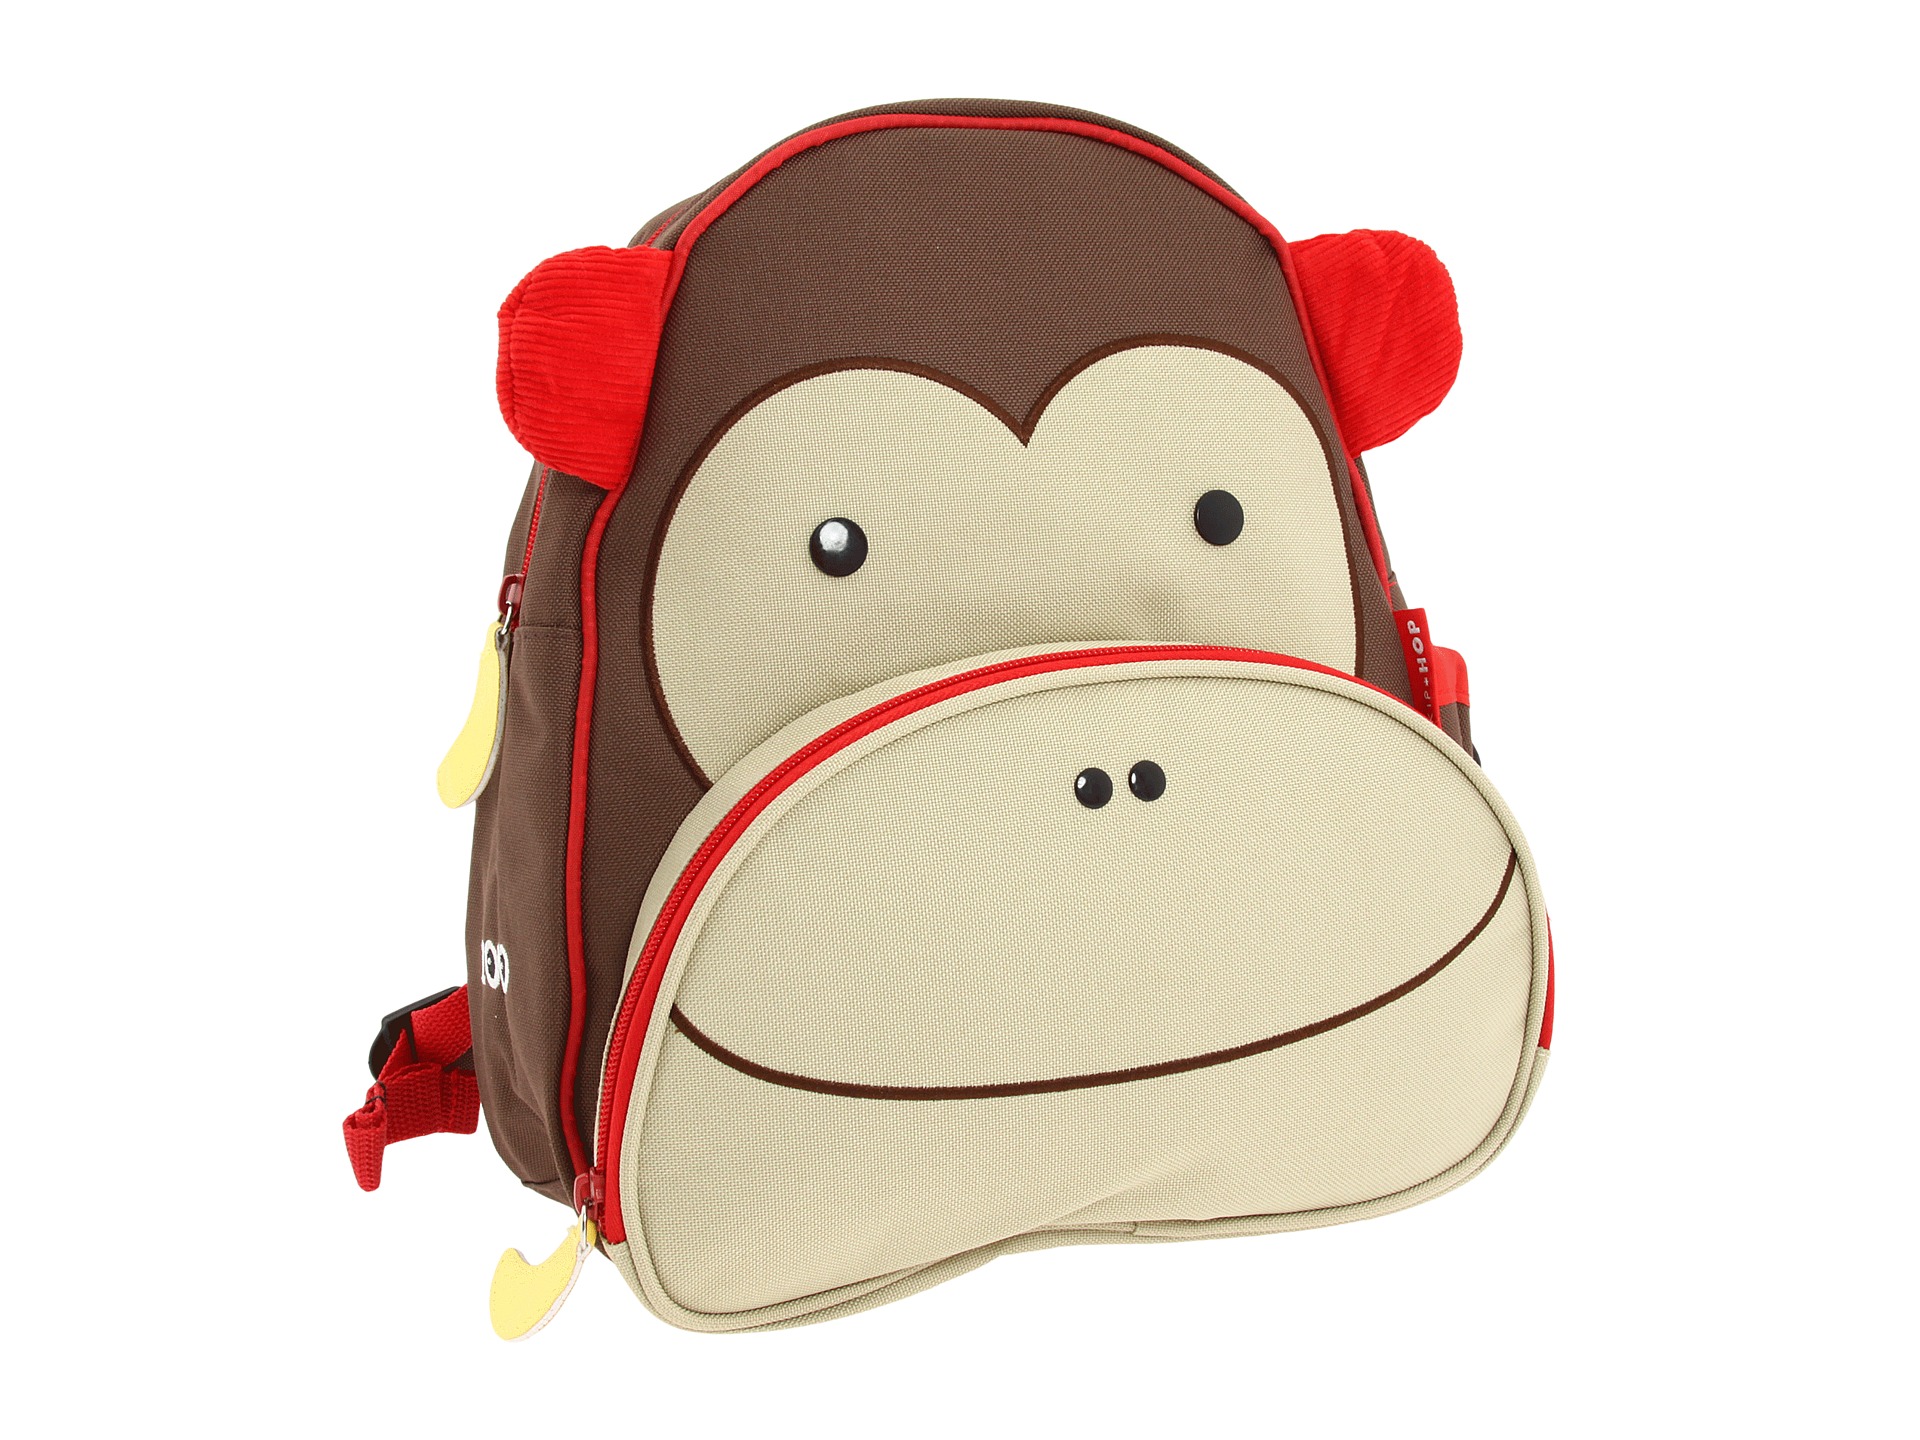 Skip Hop Zoo Pack Backpack - Zappos.com Free Shipping BOTH Ways